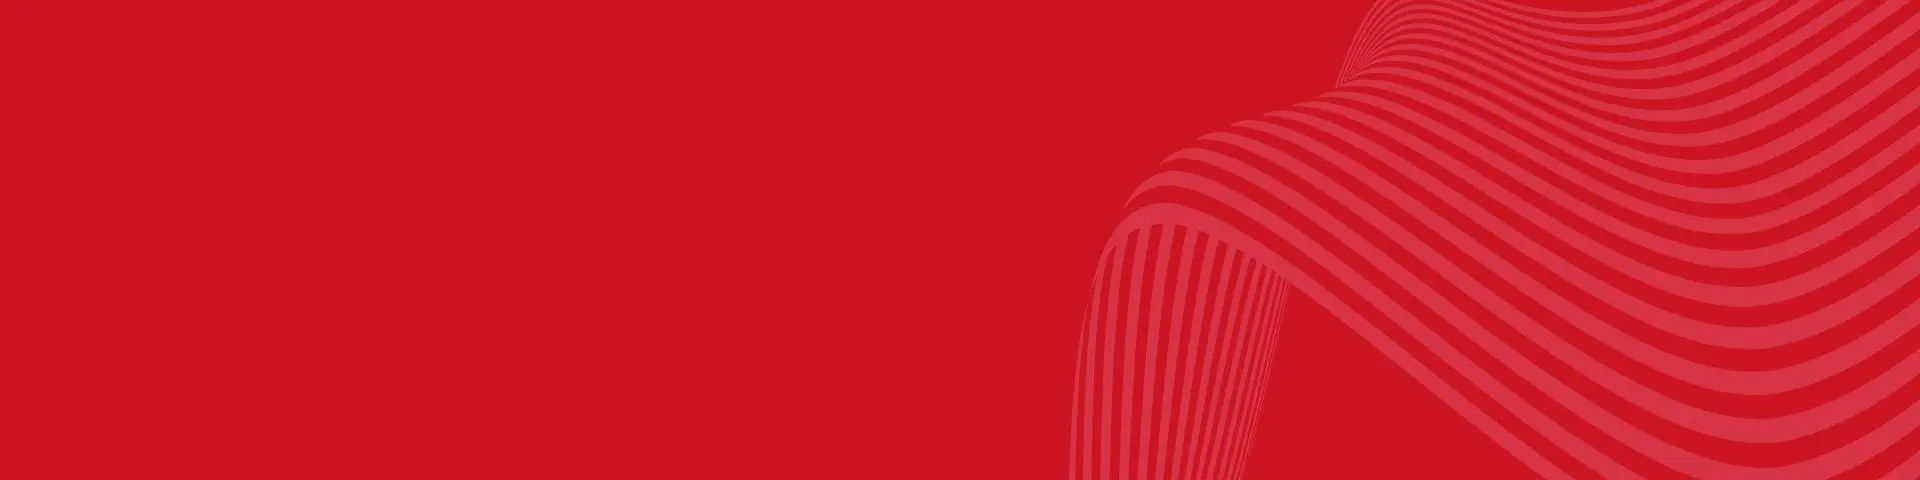 Wave motif on a red background